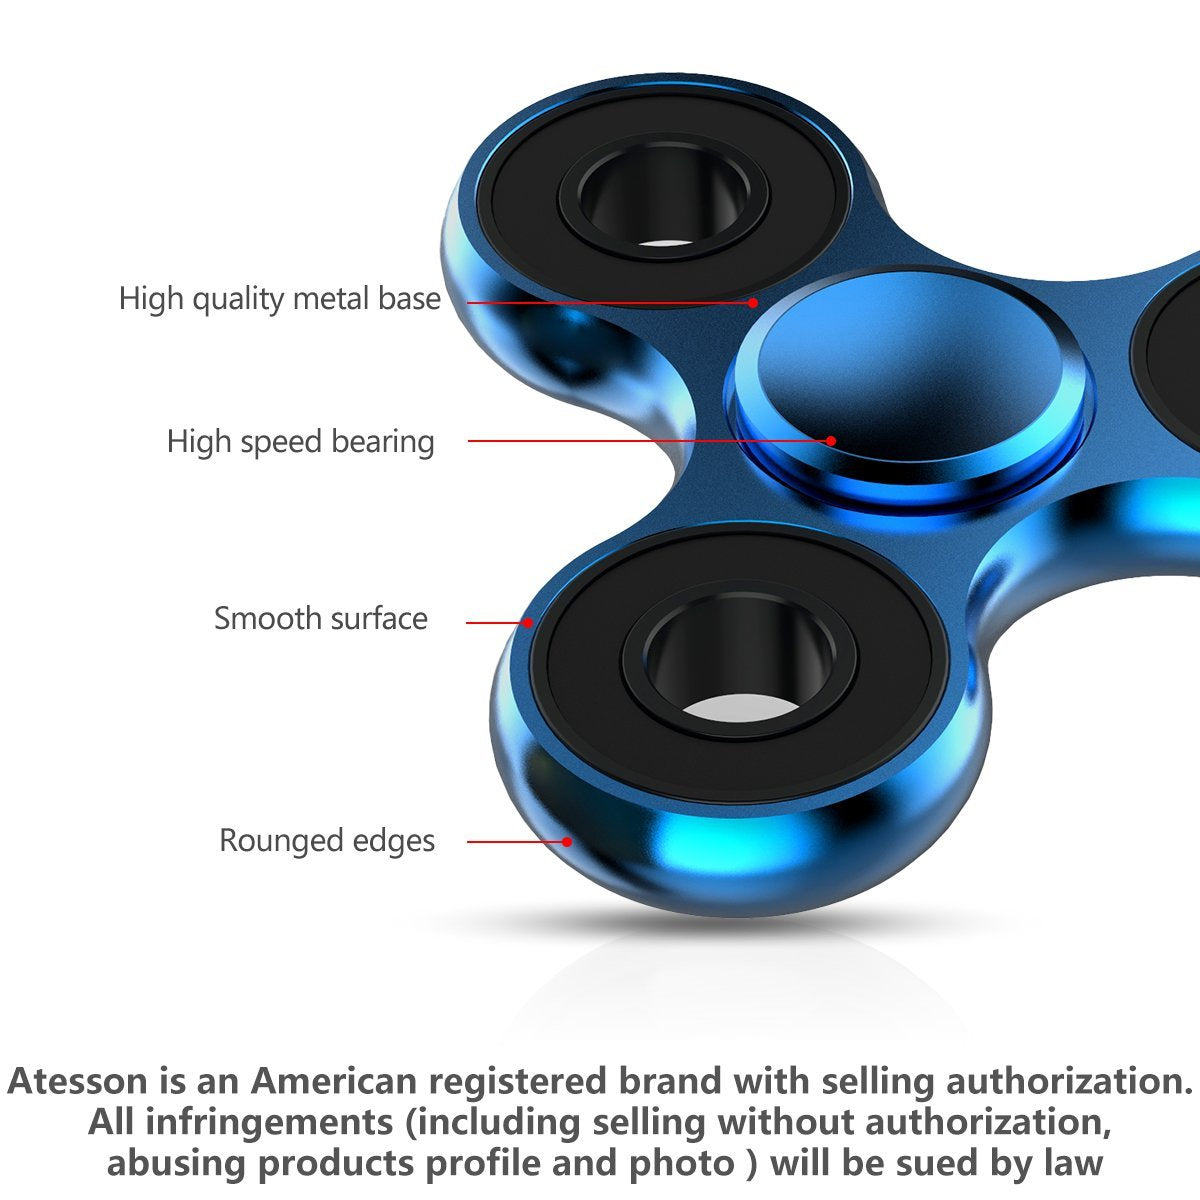 ATESSON Fidget Spinner Toy Ultra Durable Stainless Steel Bearing High Speed 2-5 Min Spins Precision Brass Material Hand spinner EDC ADHD Focus Anxiety Stress Relief Boredom Killing Time Toys